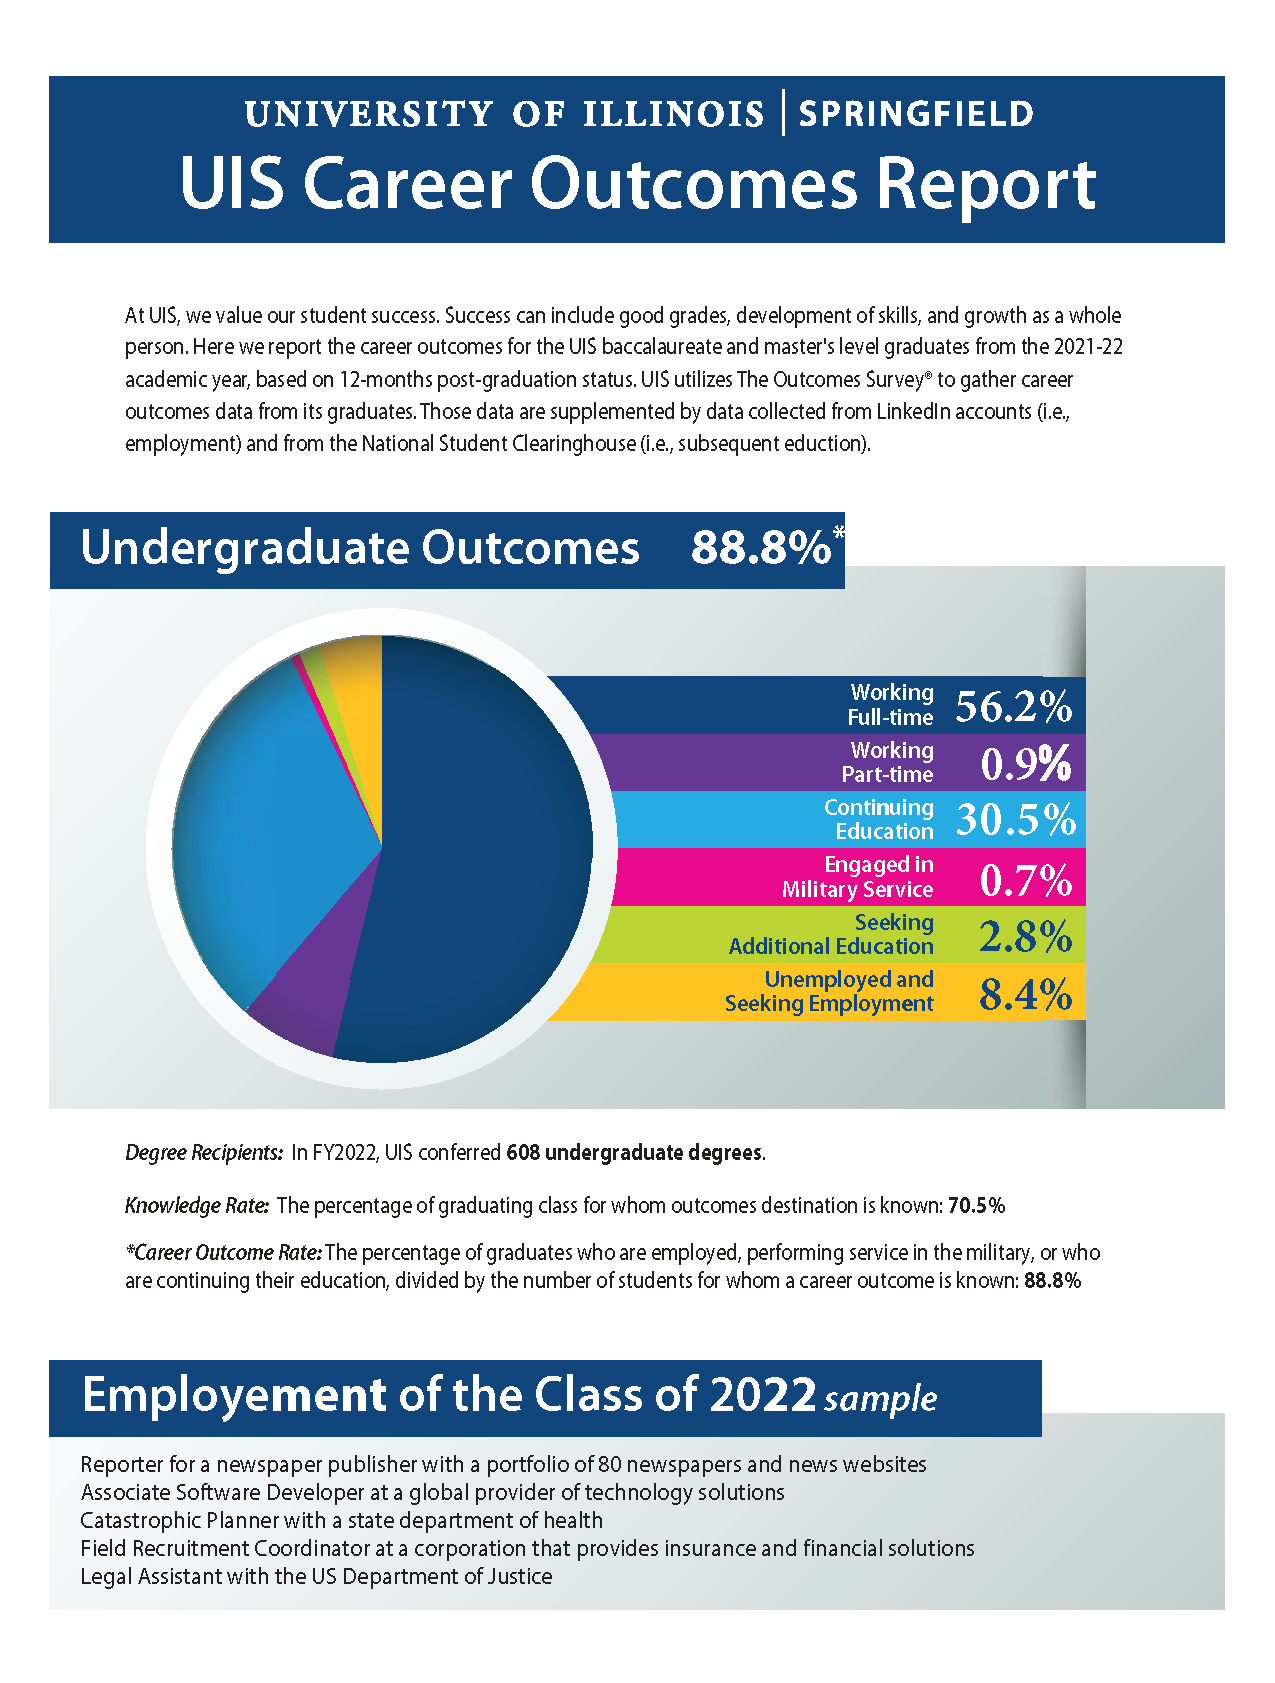 small picture of the infographic of UIS Career Outcomes Report